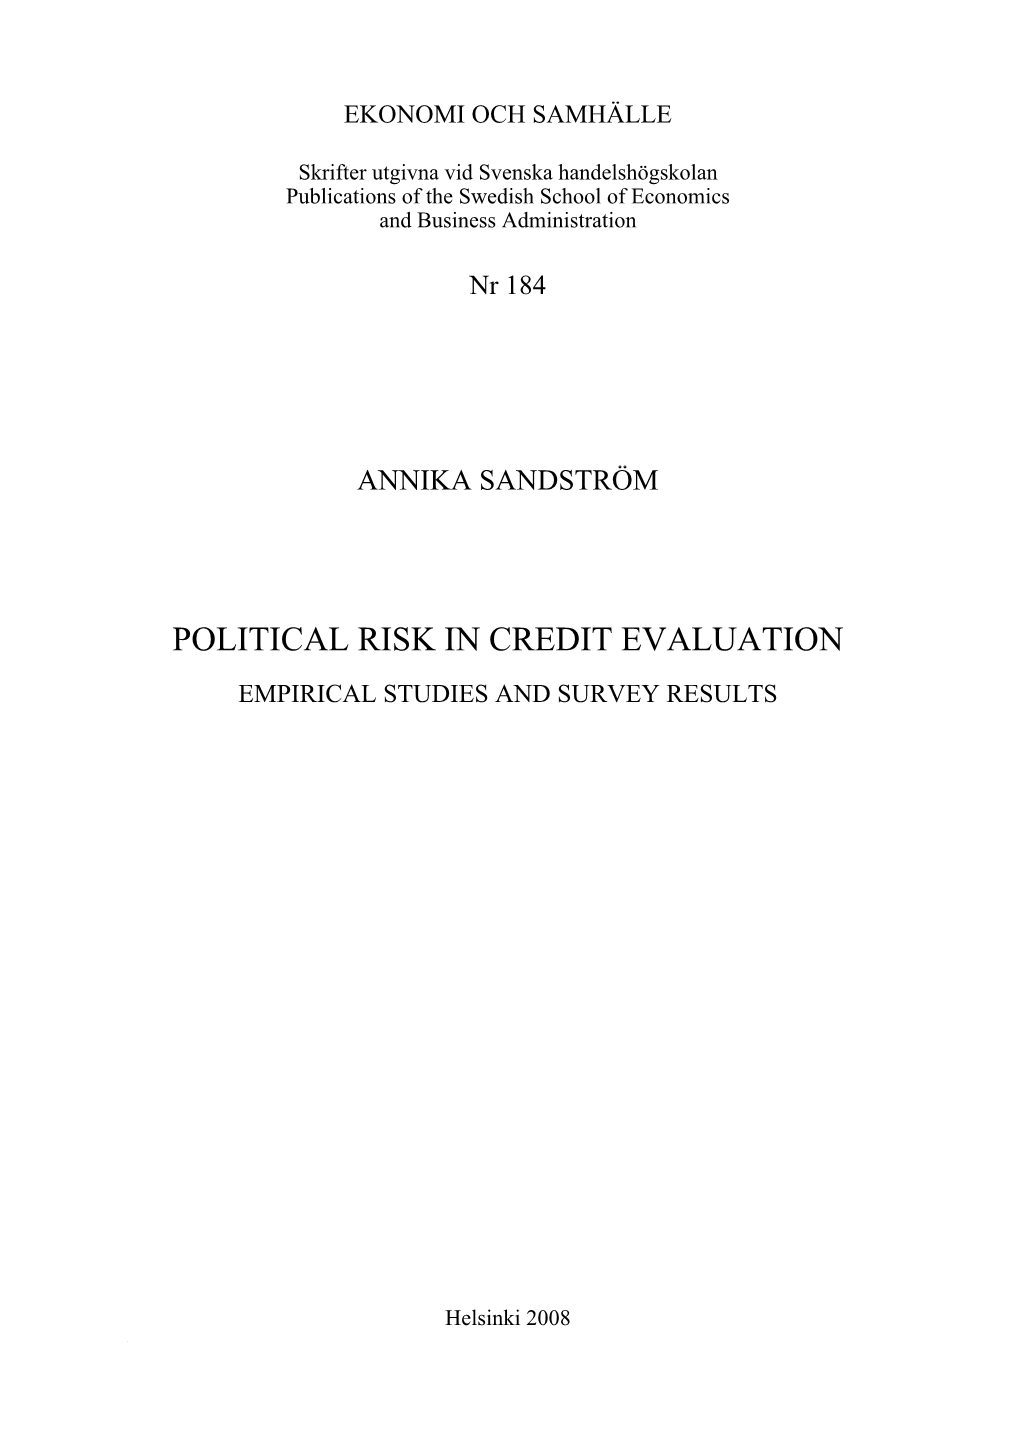 Political Risk in Credit Evaluation Empirical Studies and Survey Results